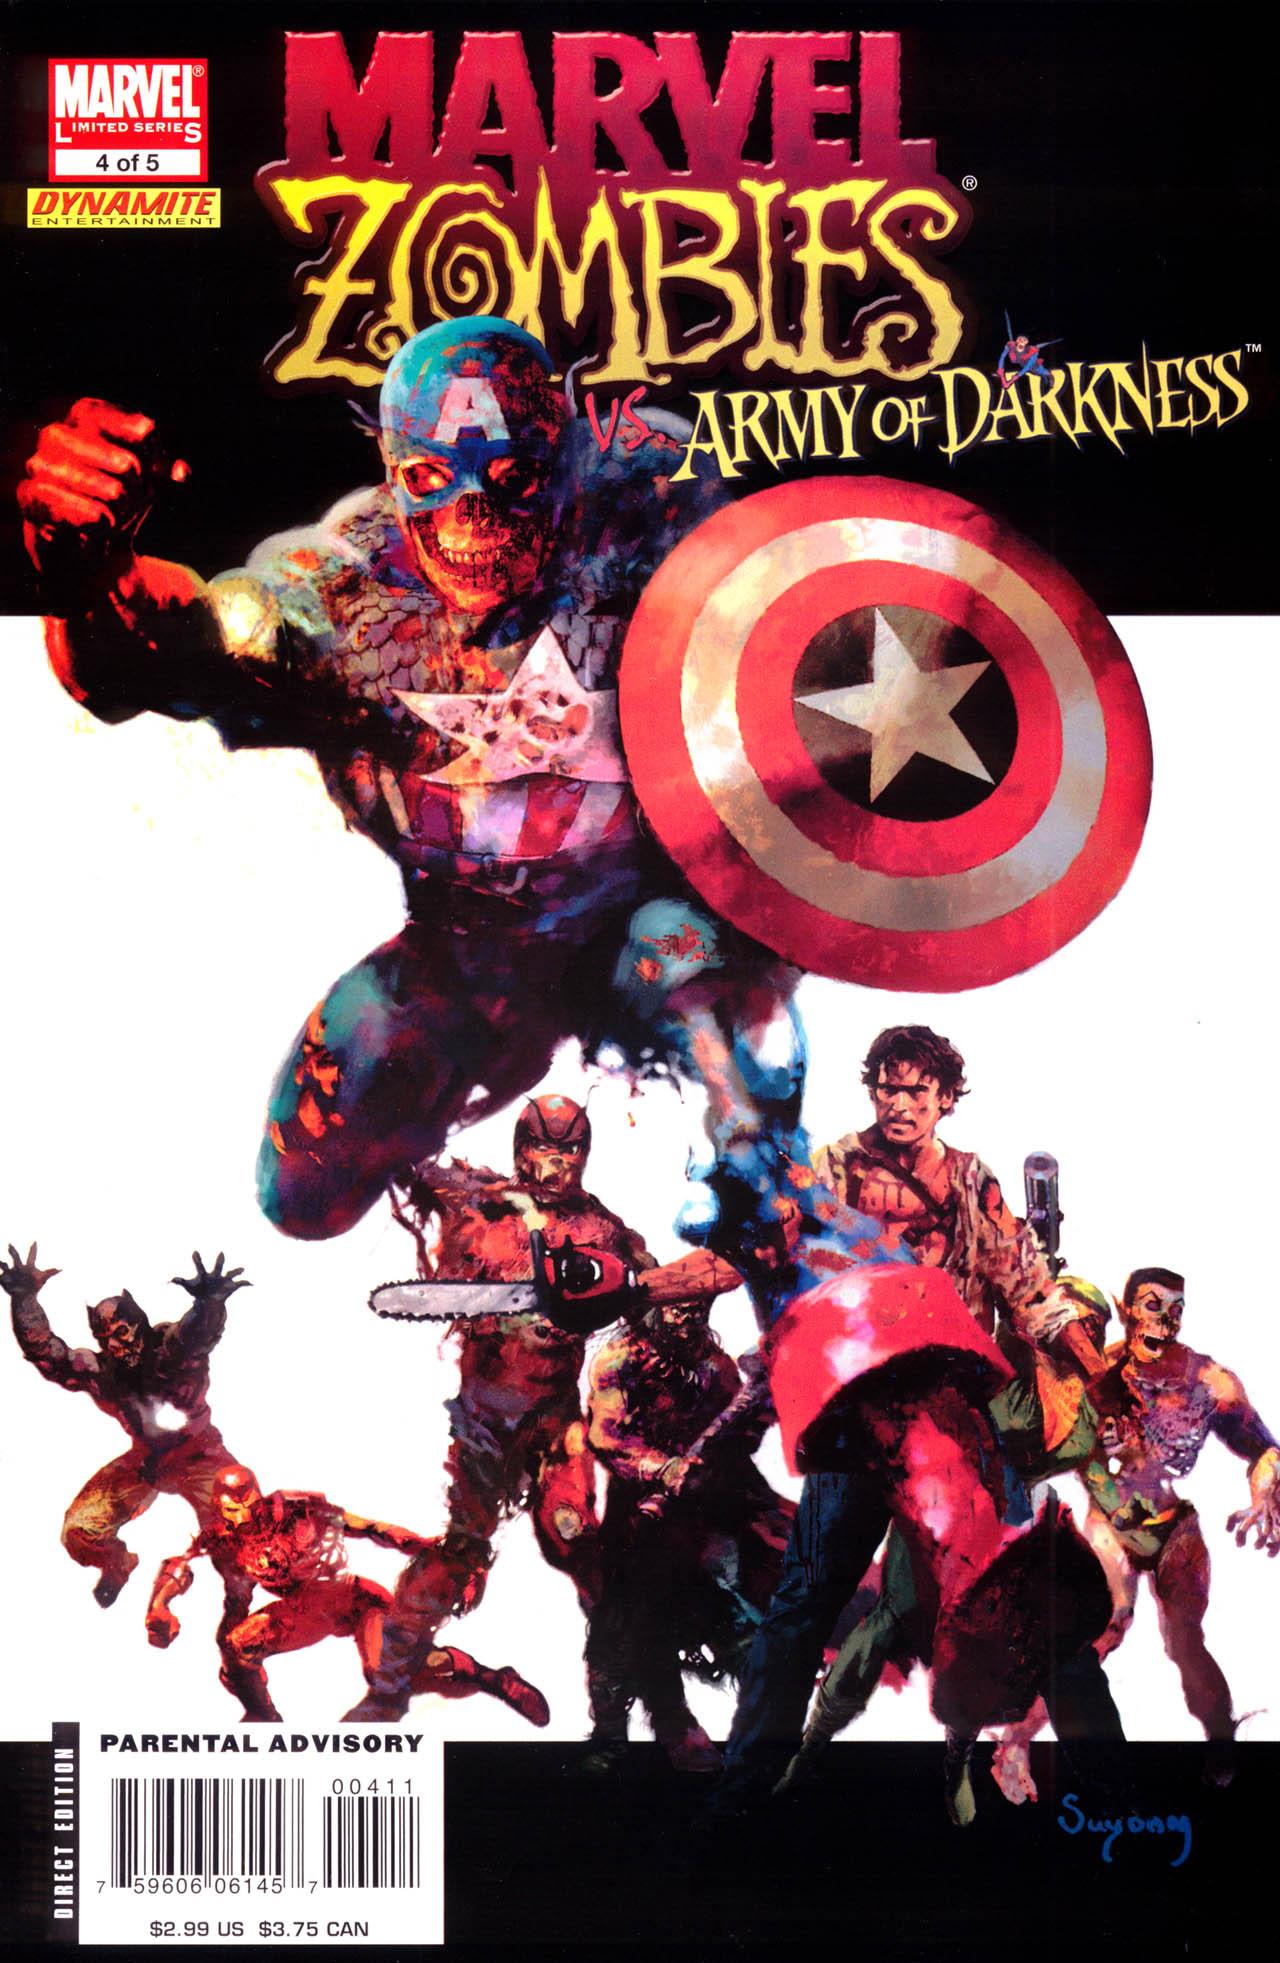 Marvel Zombies Vs. Army of Darkness Vol. 1 #4